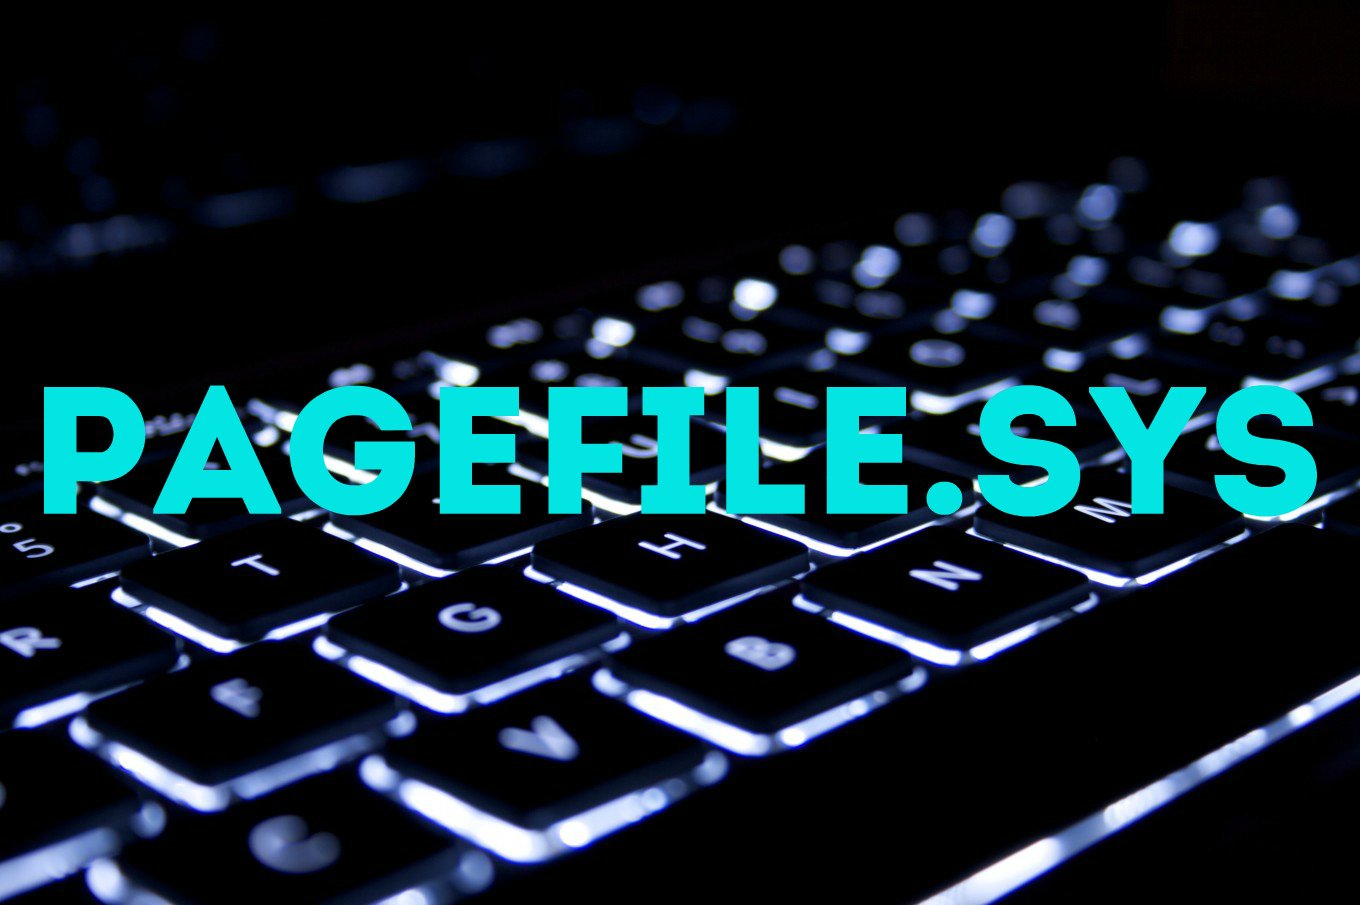 Pagefile.sys